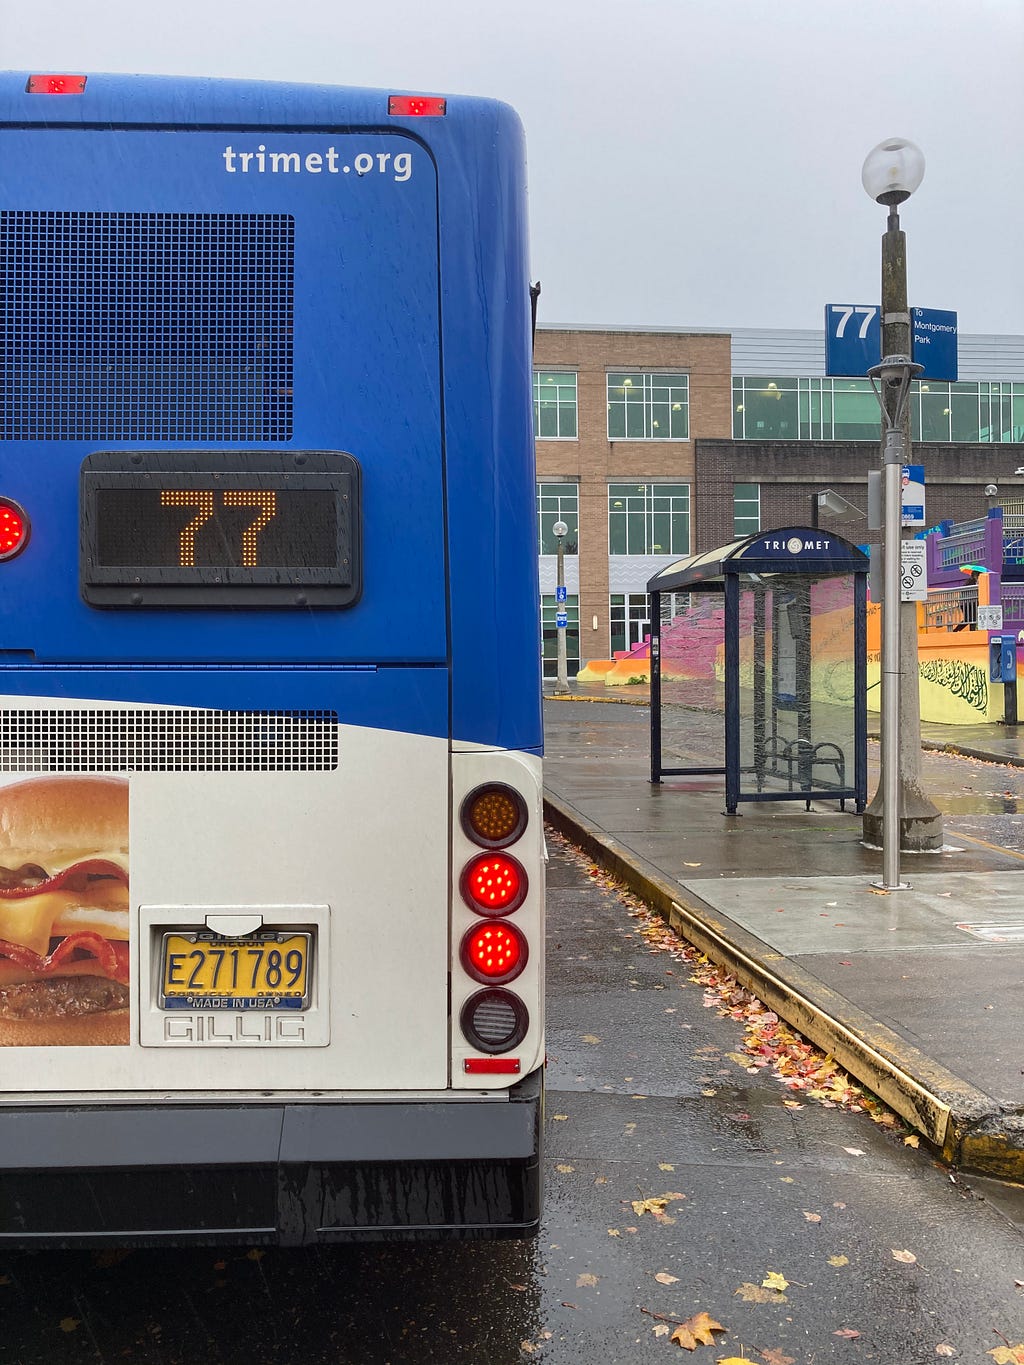 A TriMet Line 77 Bus waiting at Hollywood Transit Center in Portland.